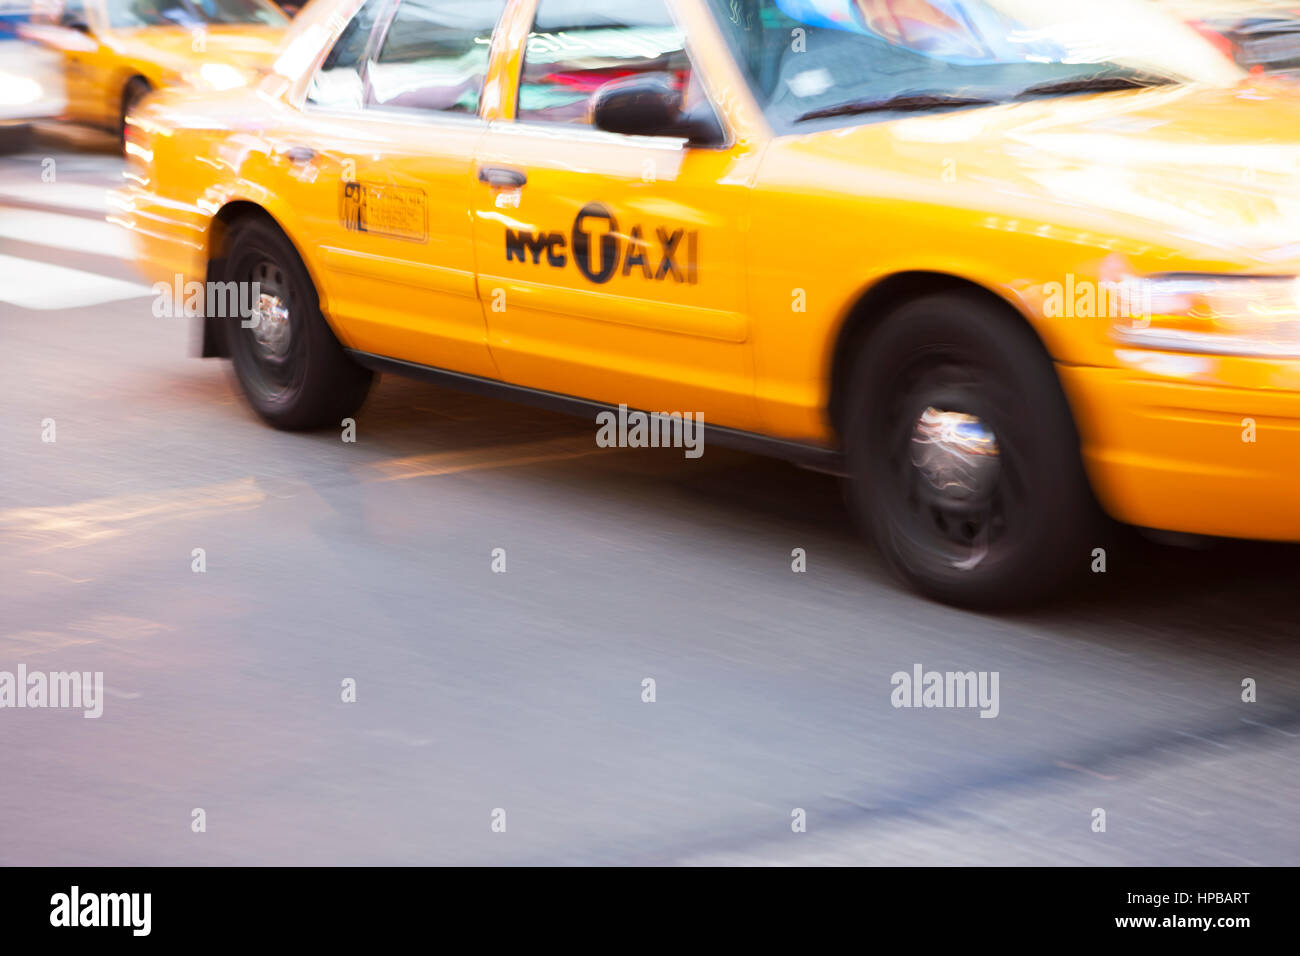 Yellow taxi Cab, Times Square, New York city, New York, USA. Stock Photo